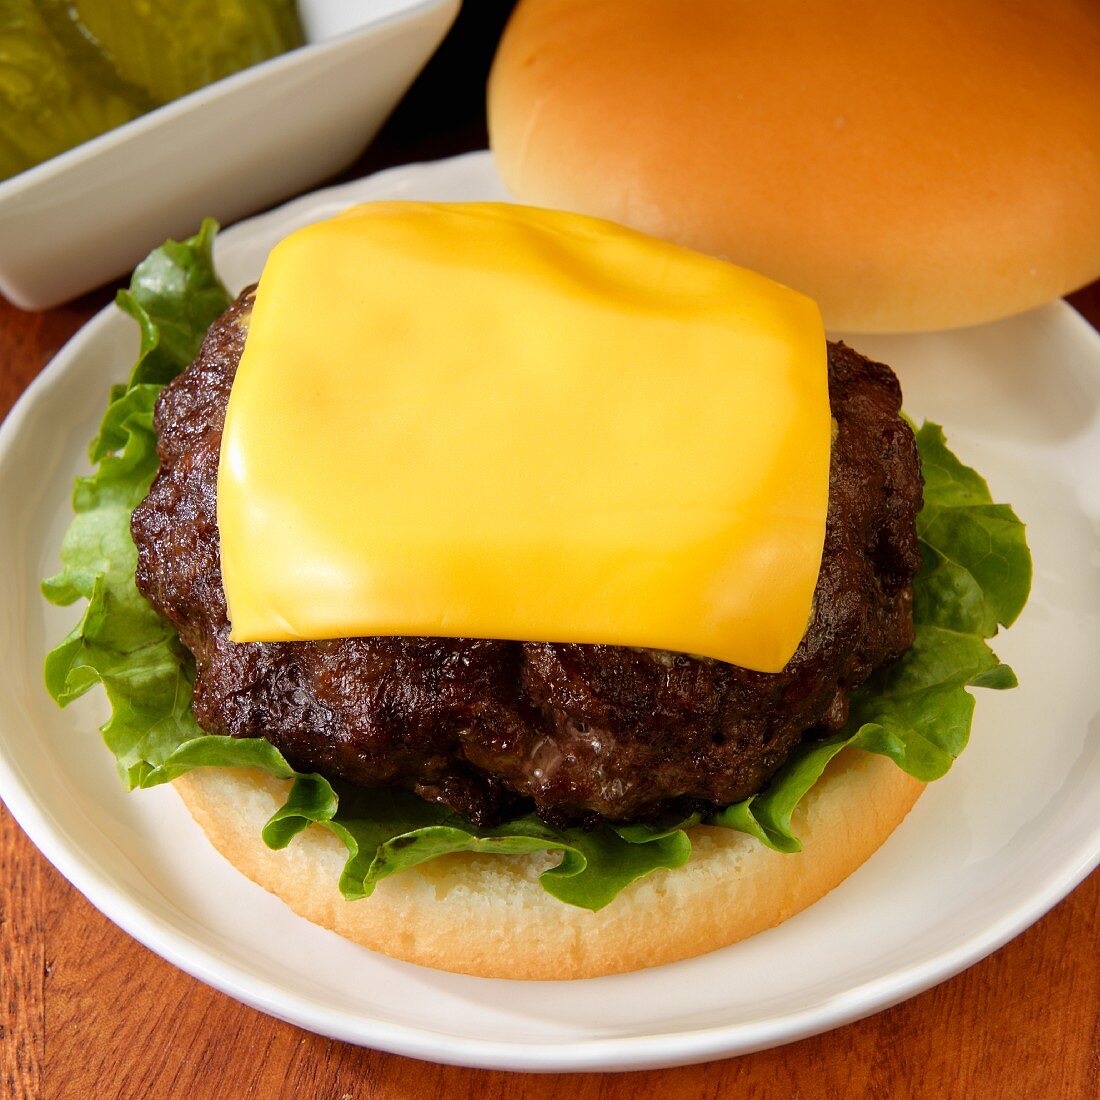 Cheeseburger with lettuce